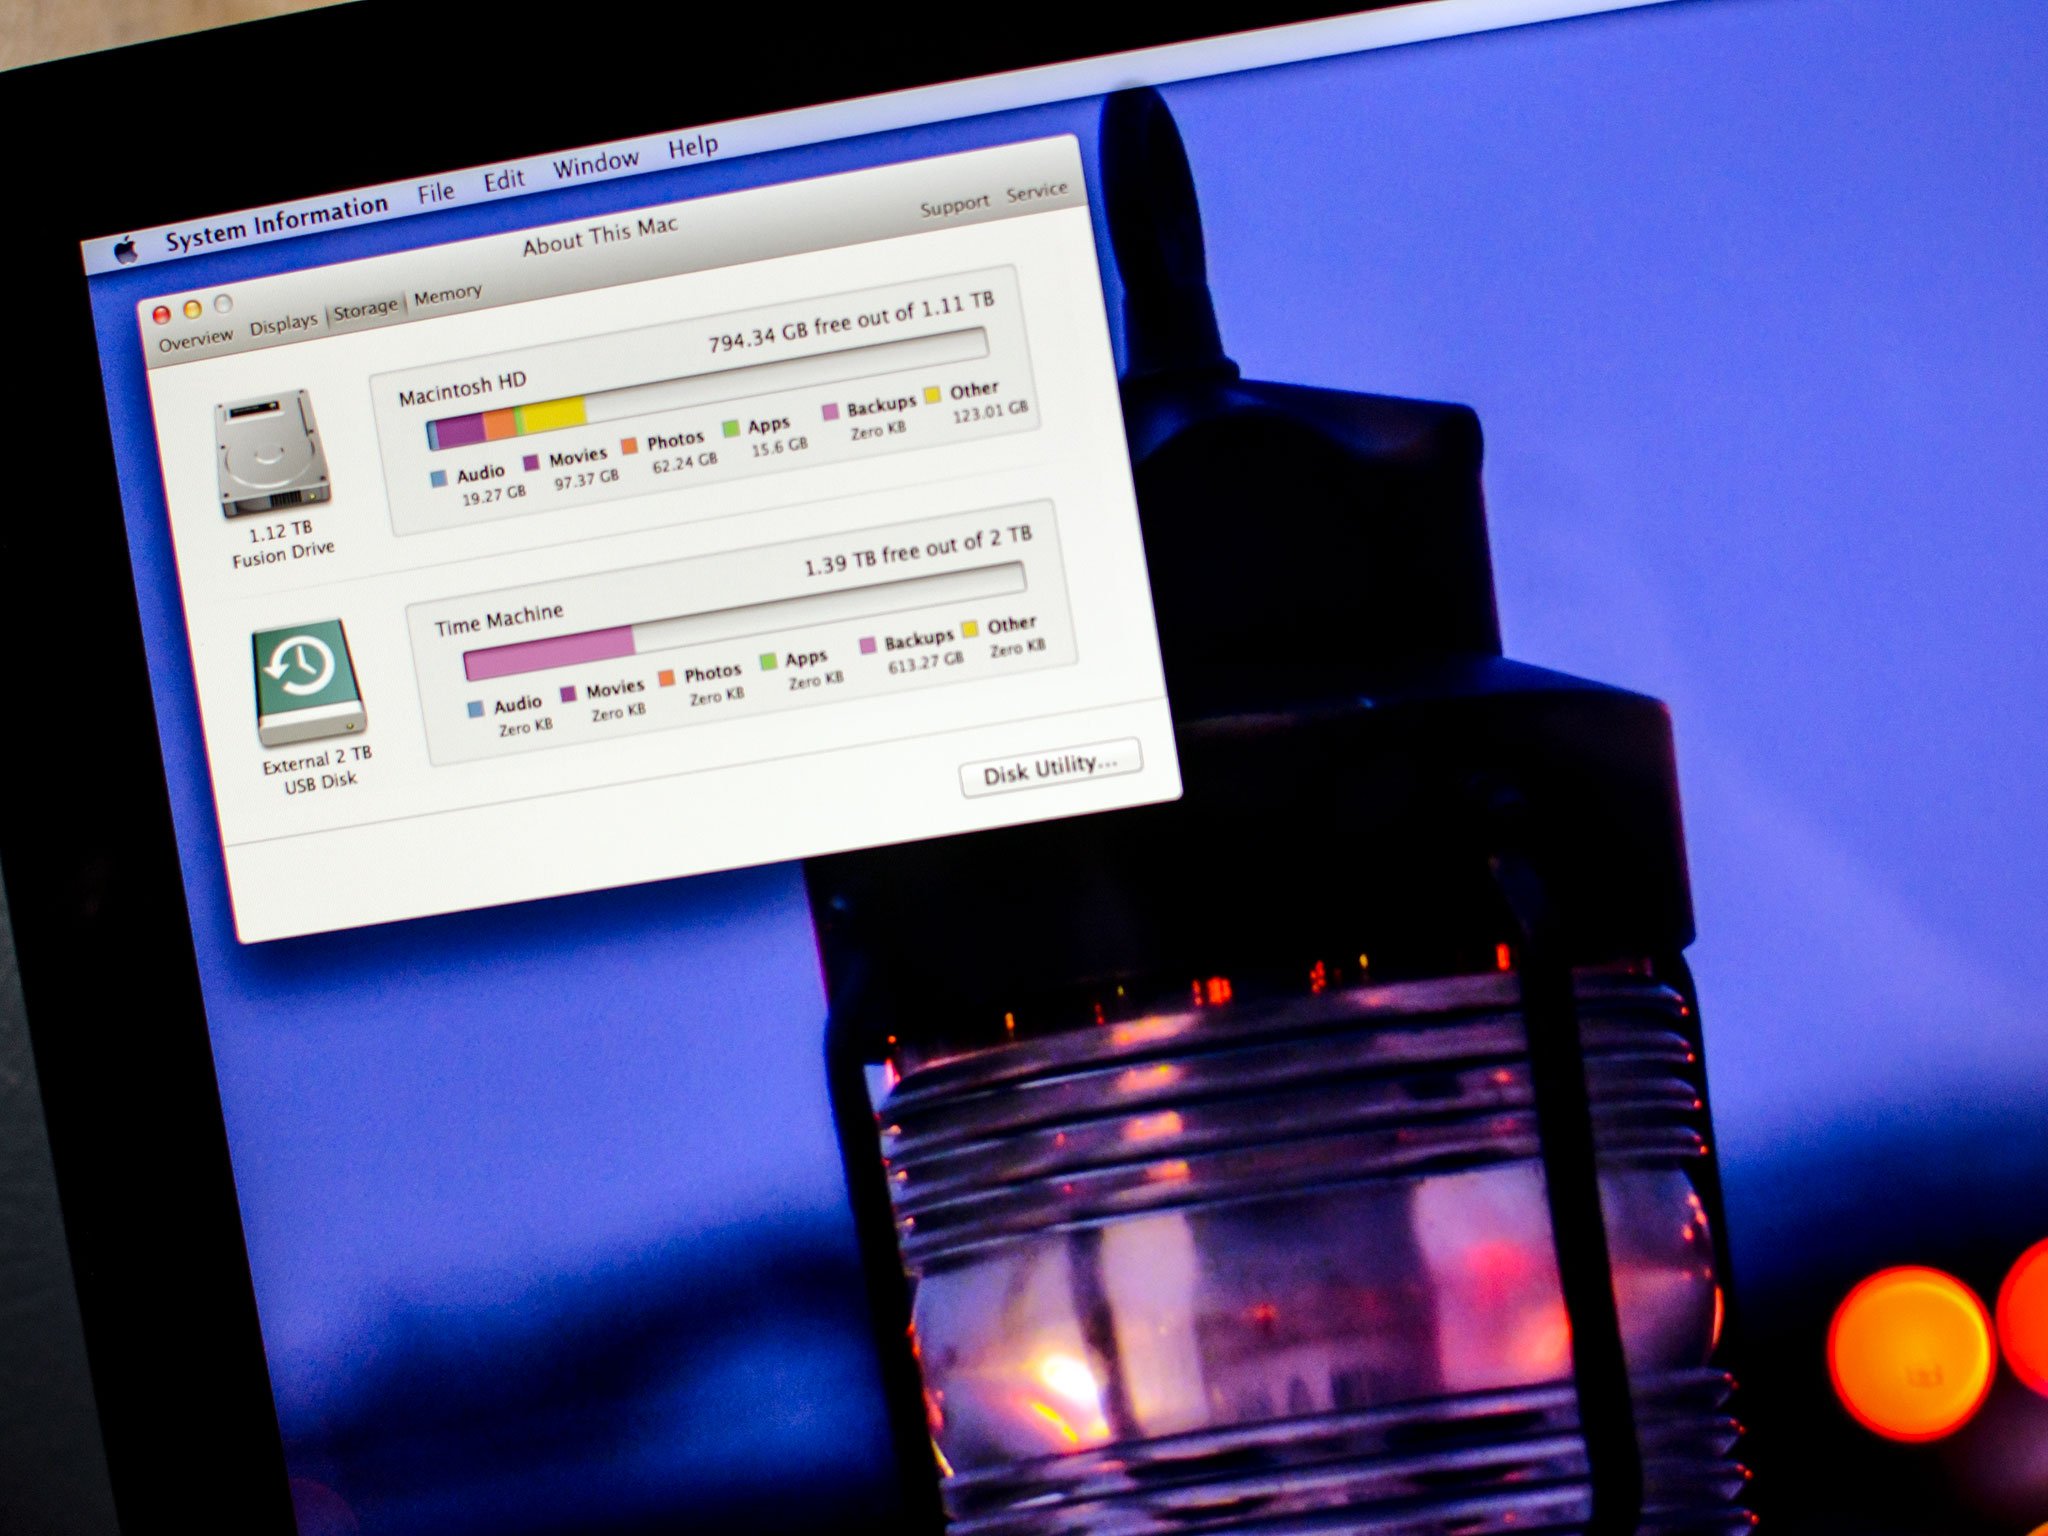 How to find out what&#39;s eating up storage space on your Mac&#39;s hard drive